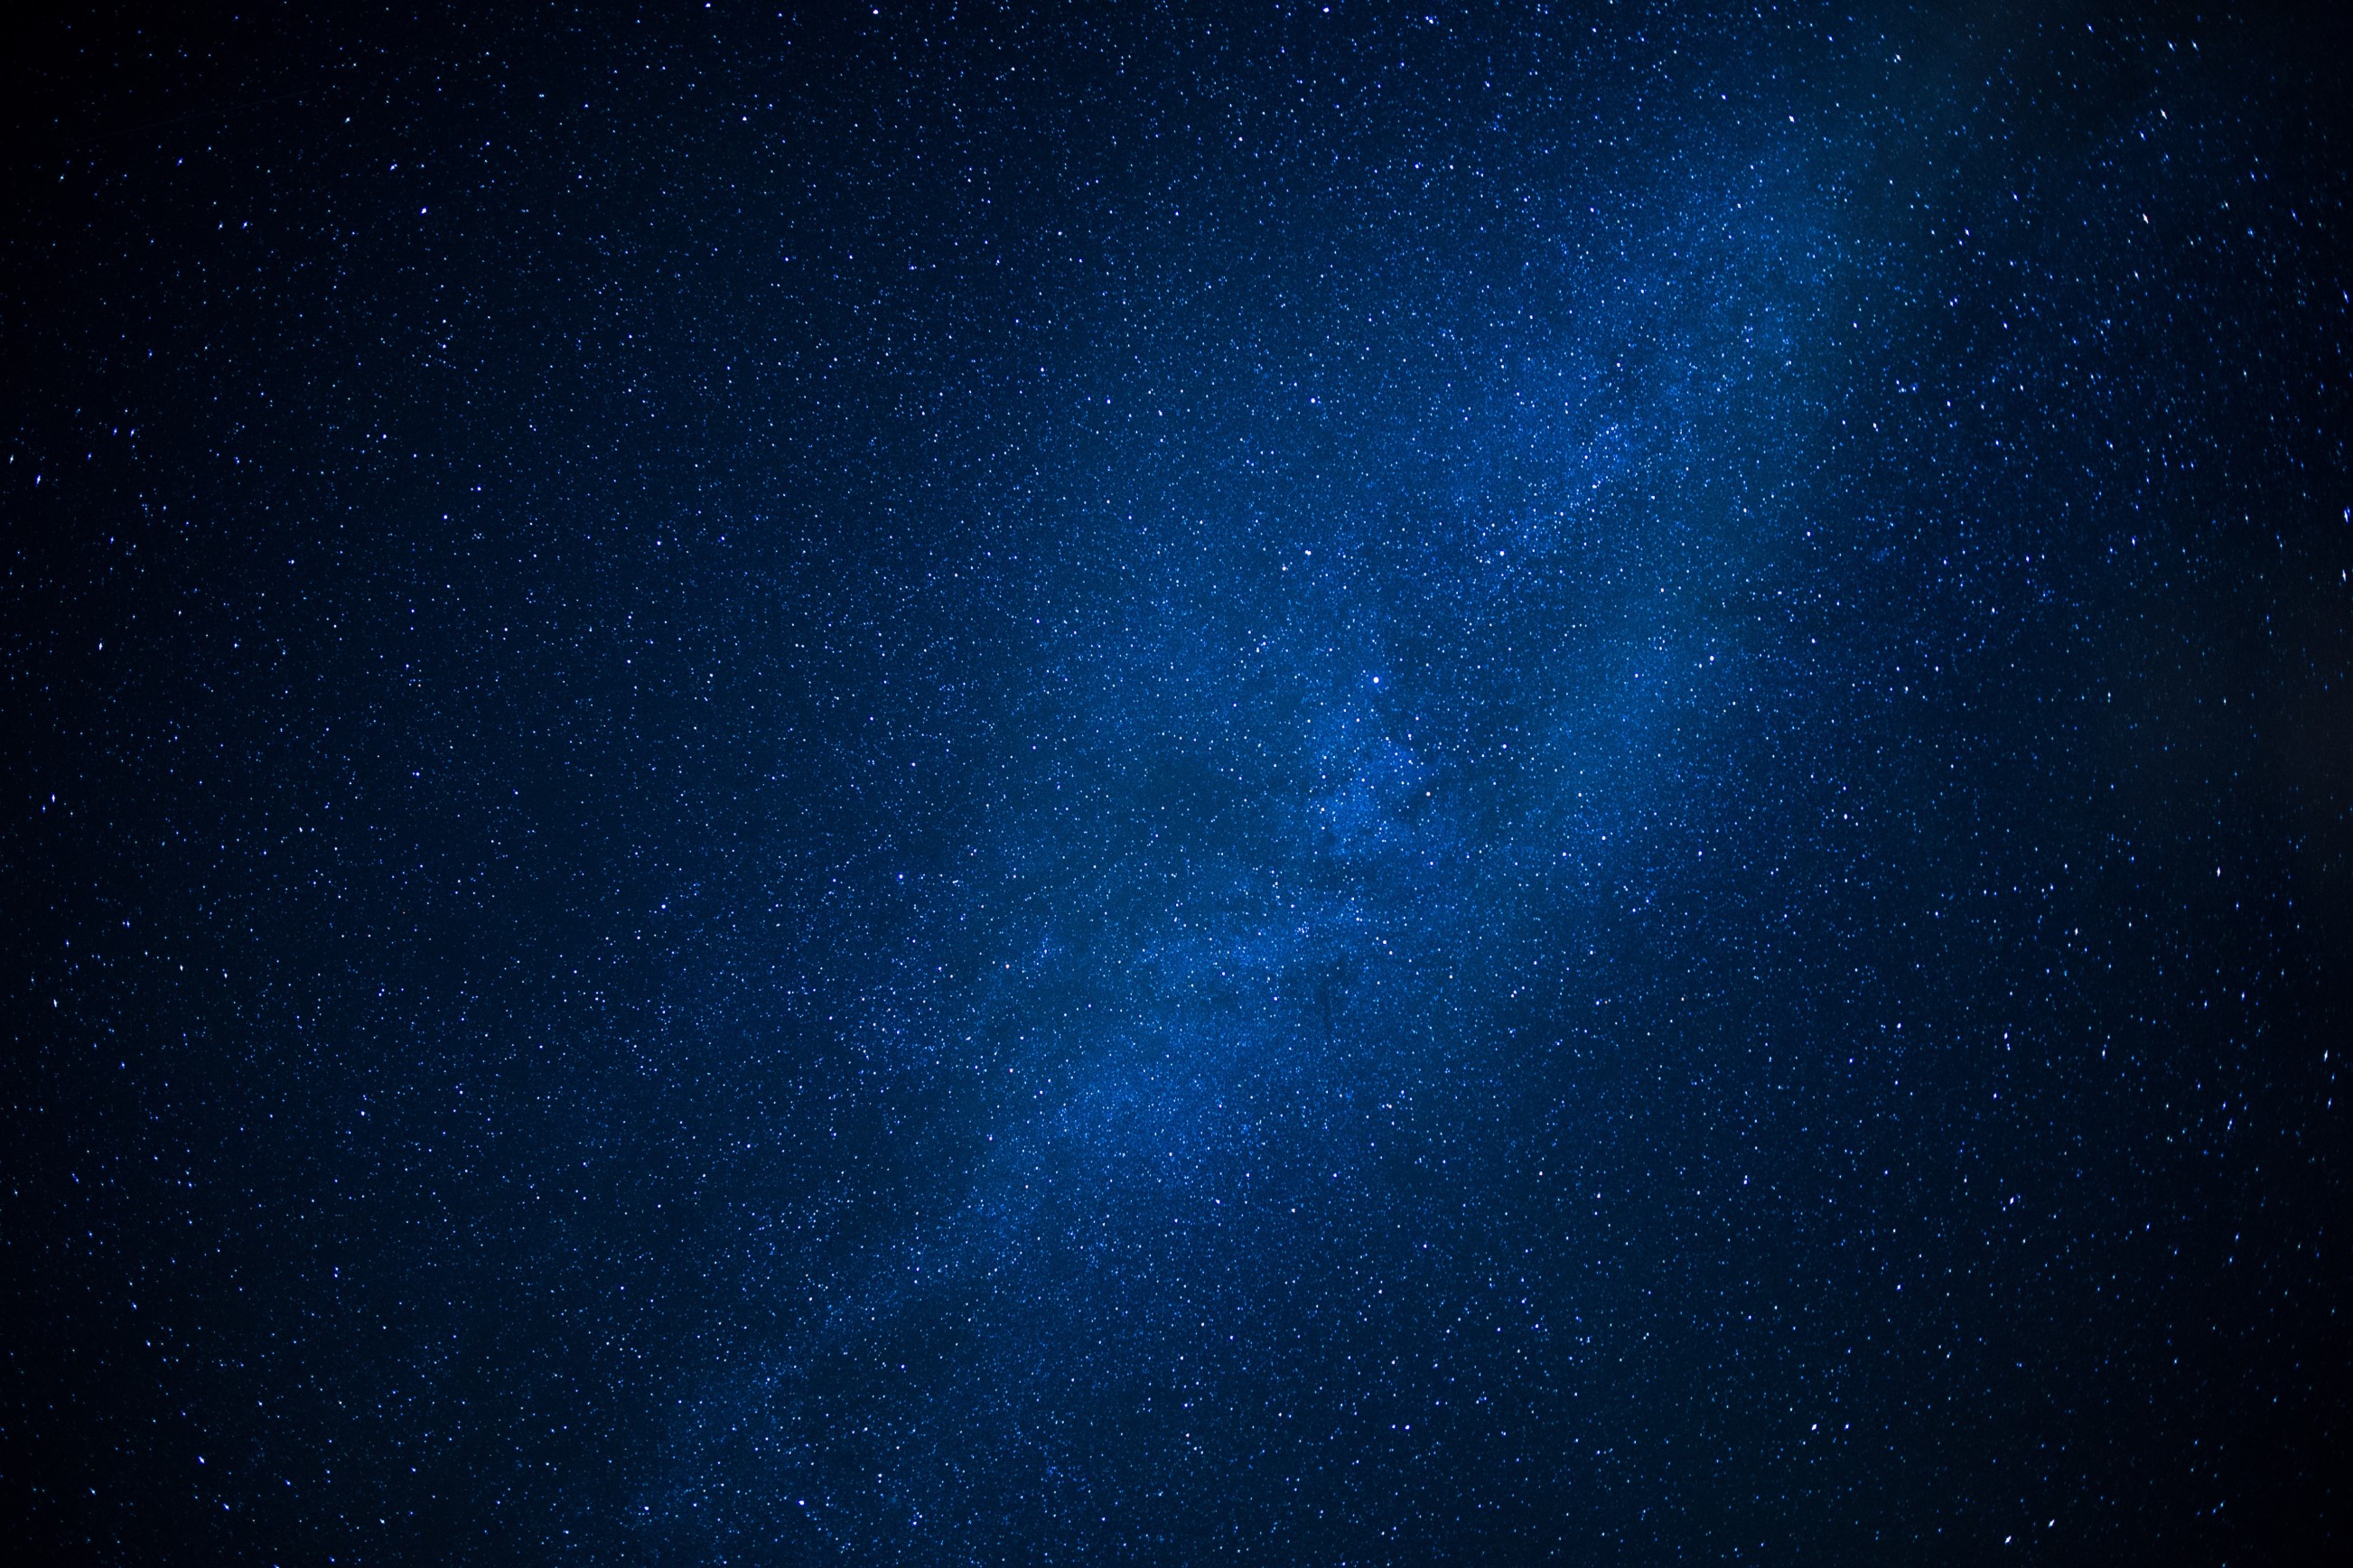 image of the night sky, many many many stars, blue, different shades of blue, white stars